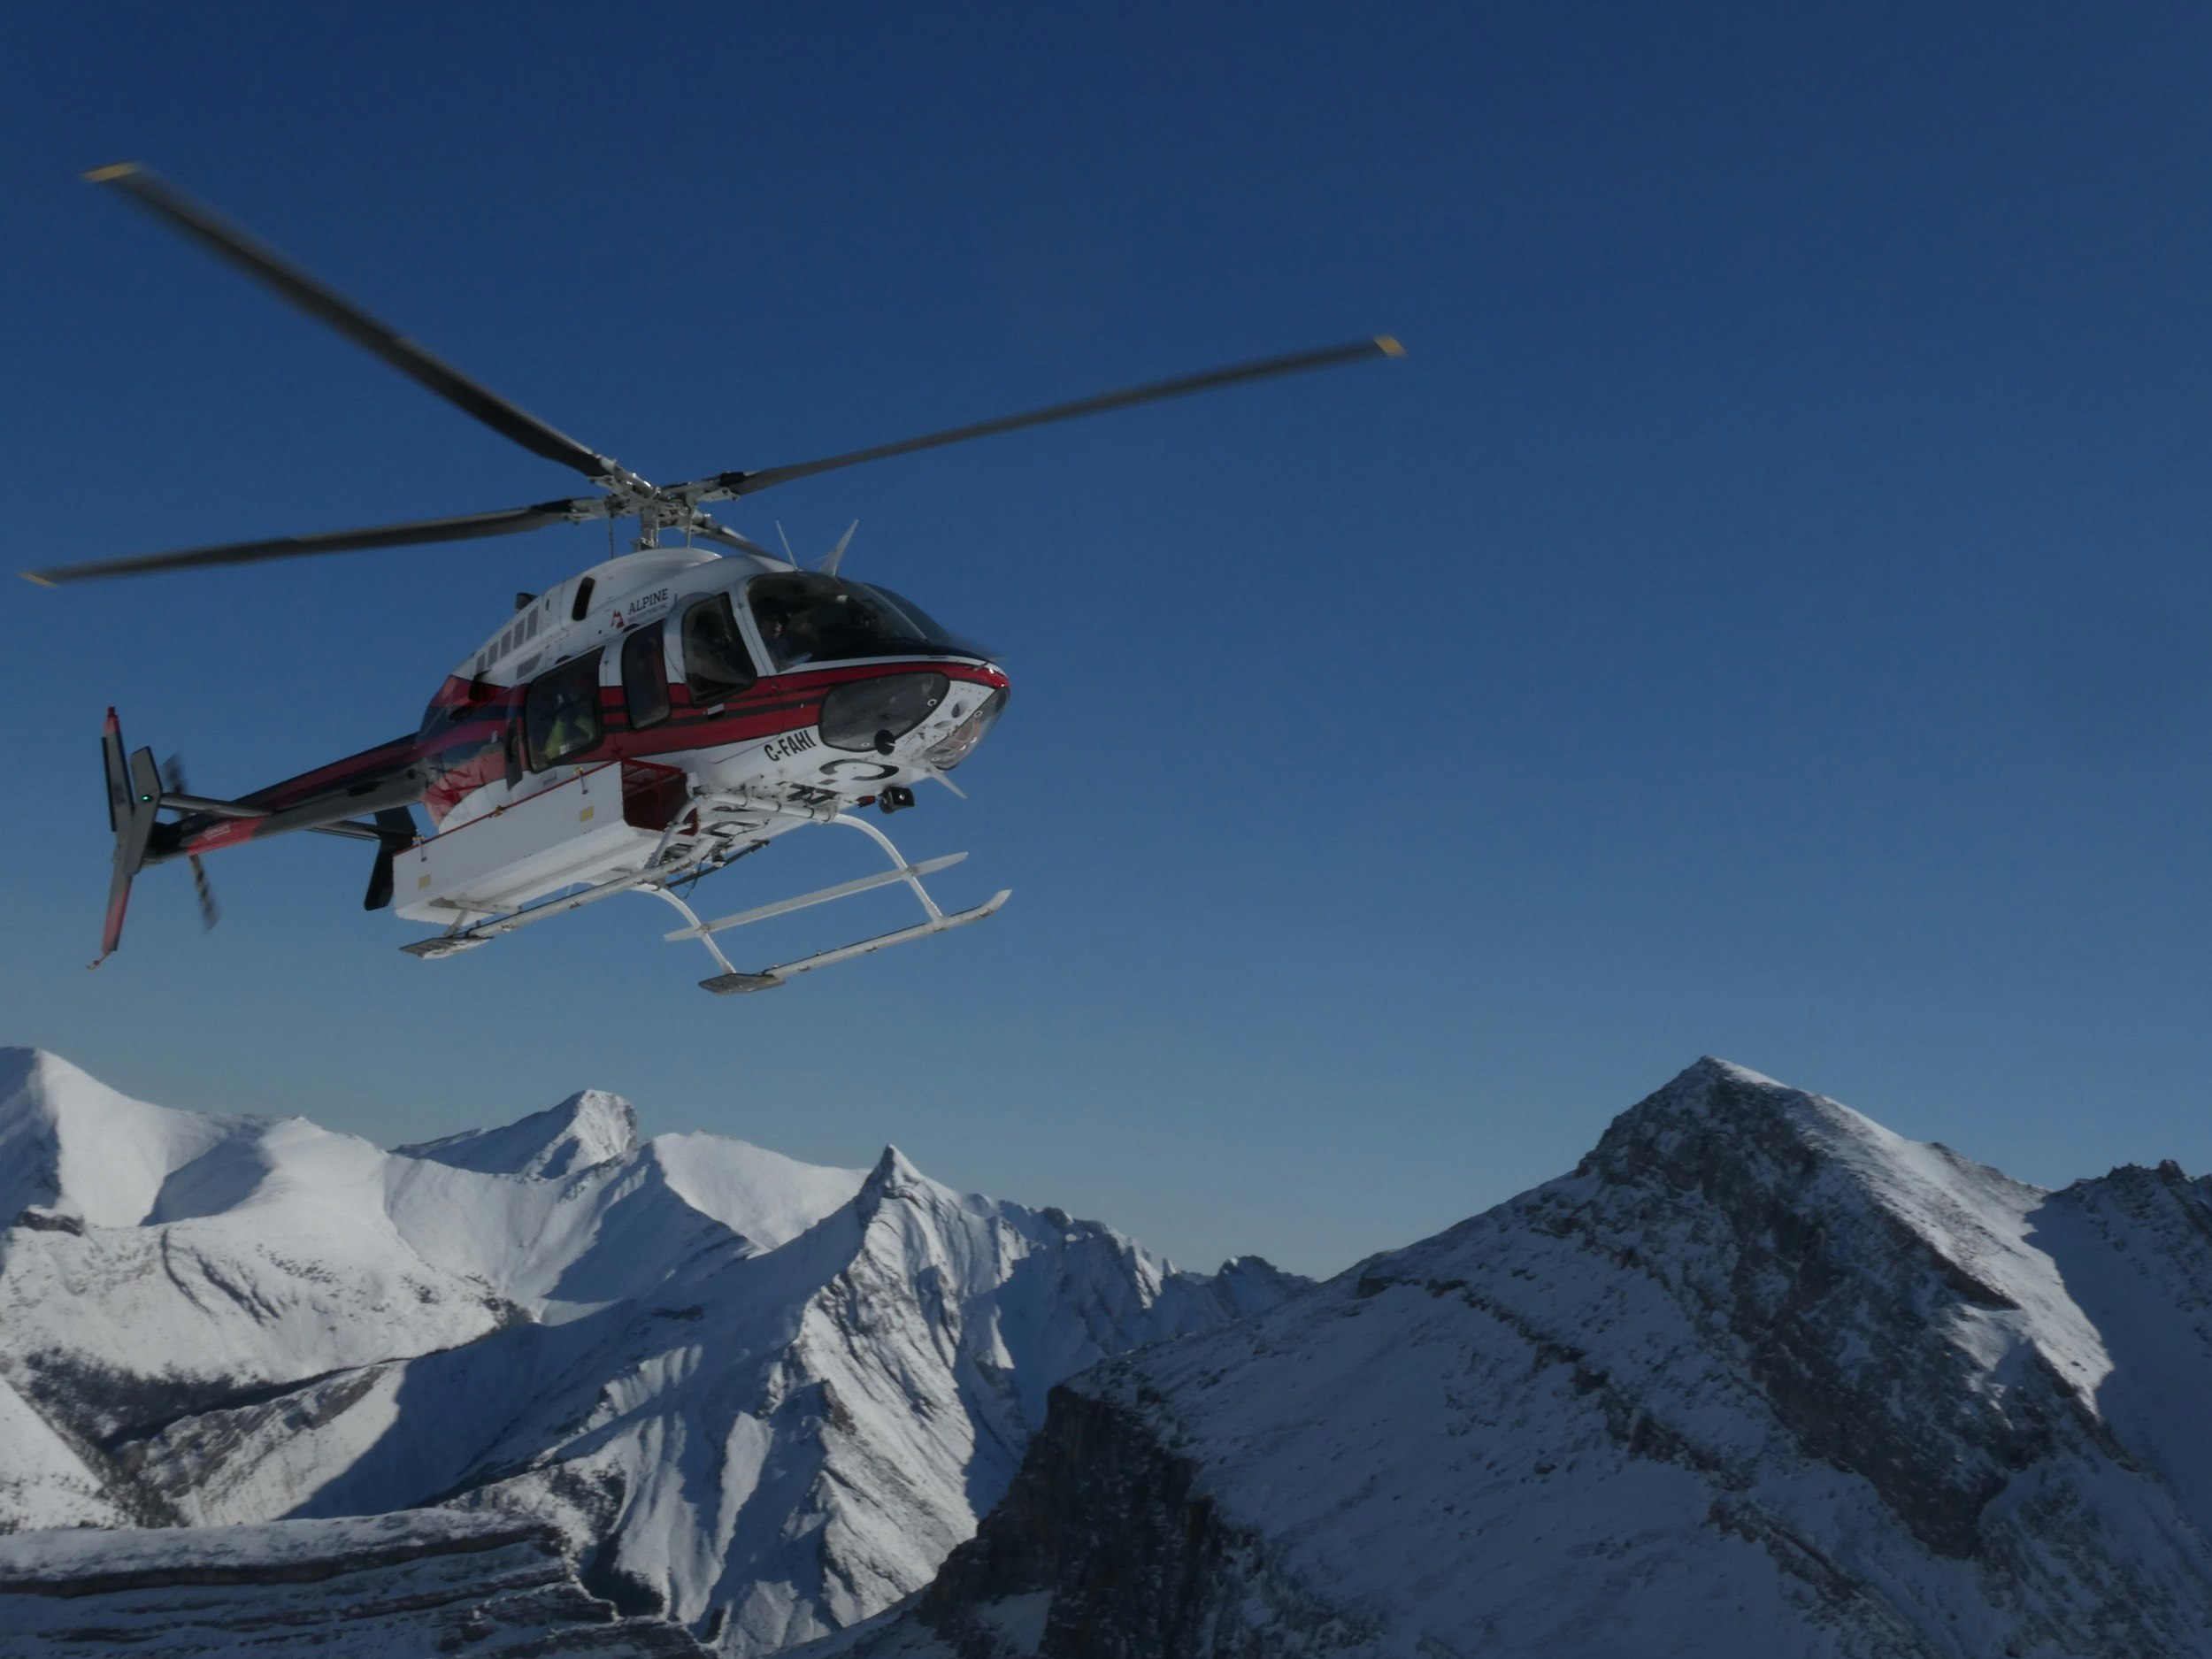 A helicopter hovers near snow capped mountains in winter at Banff and Lake Louise